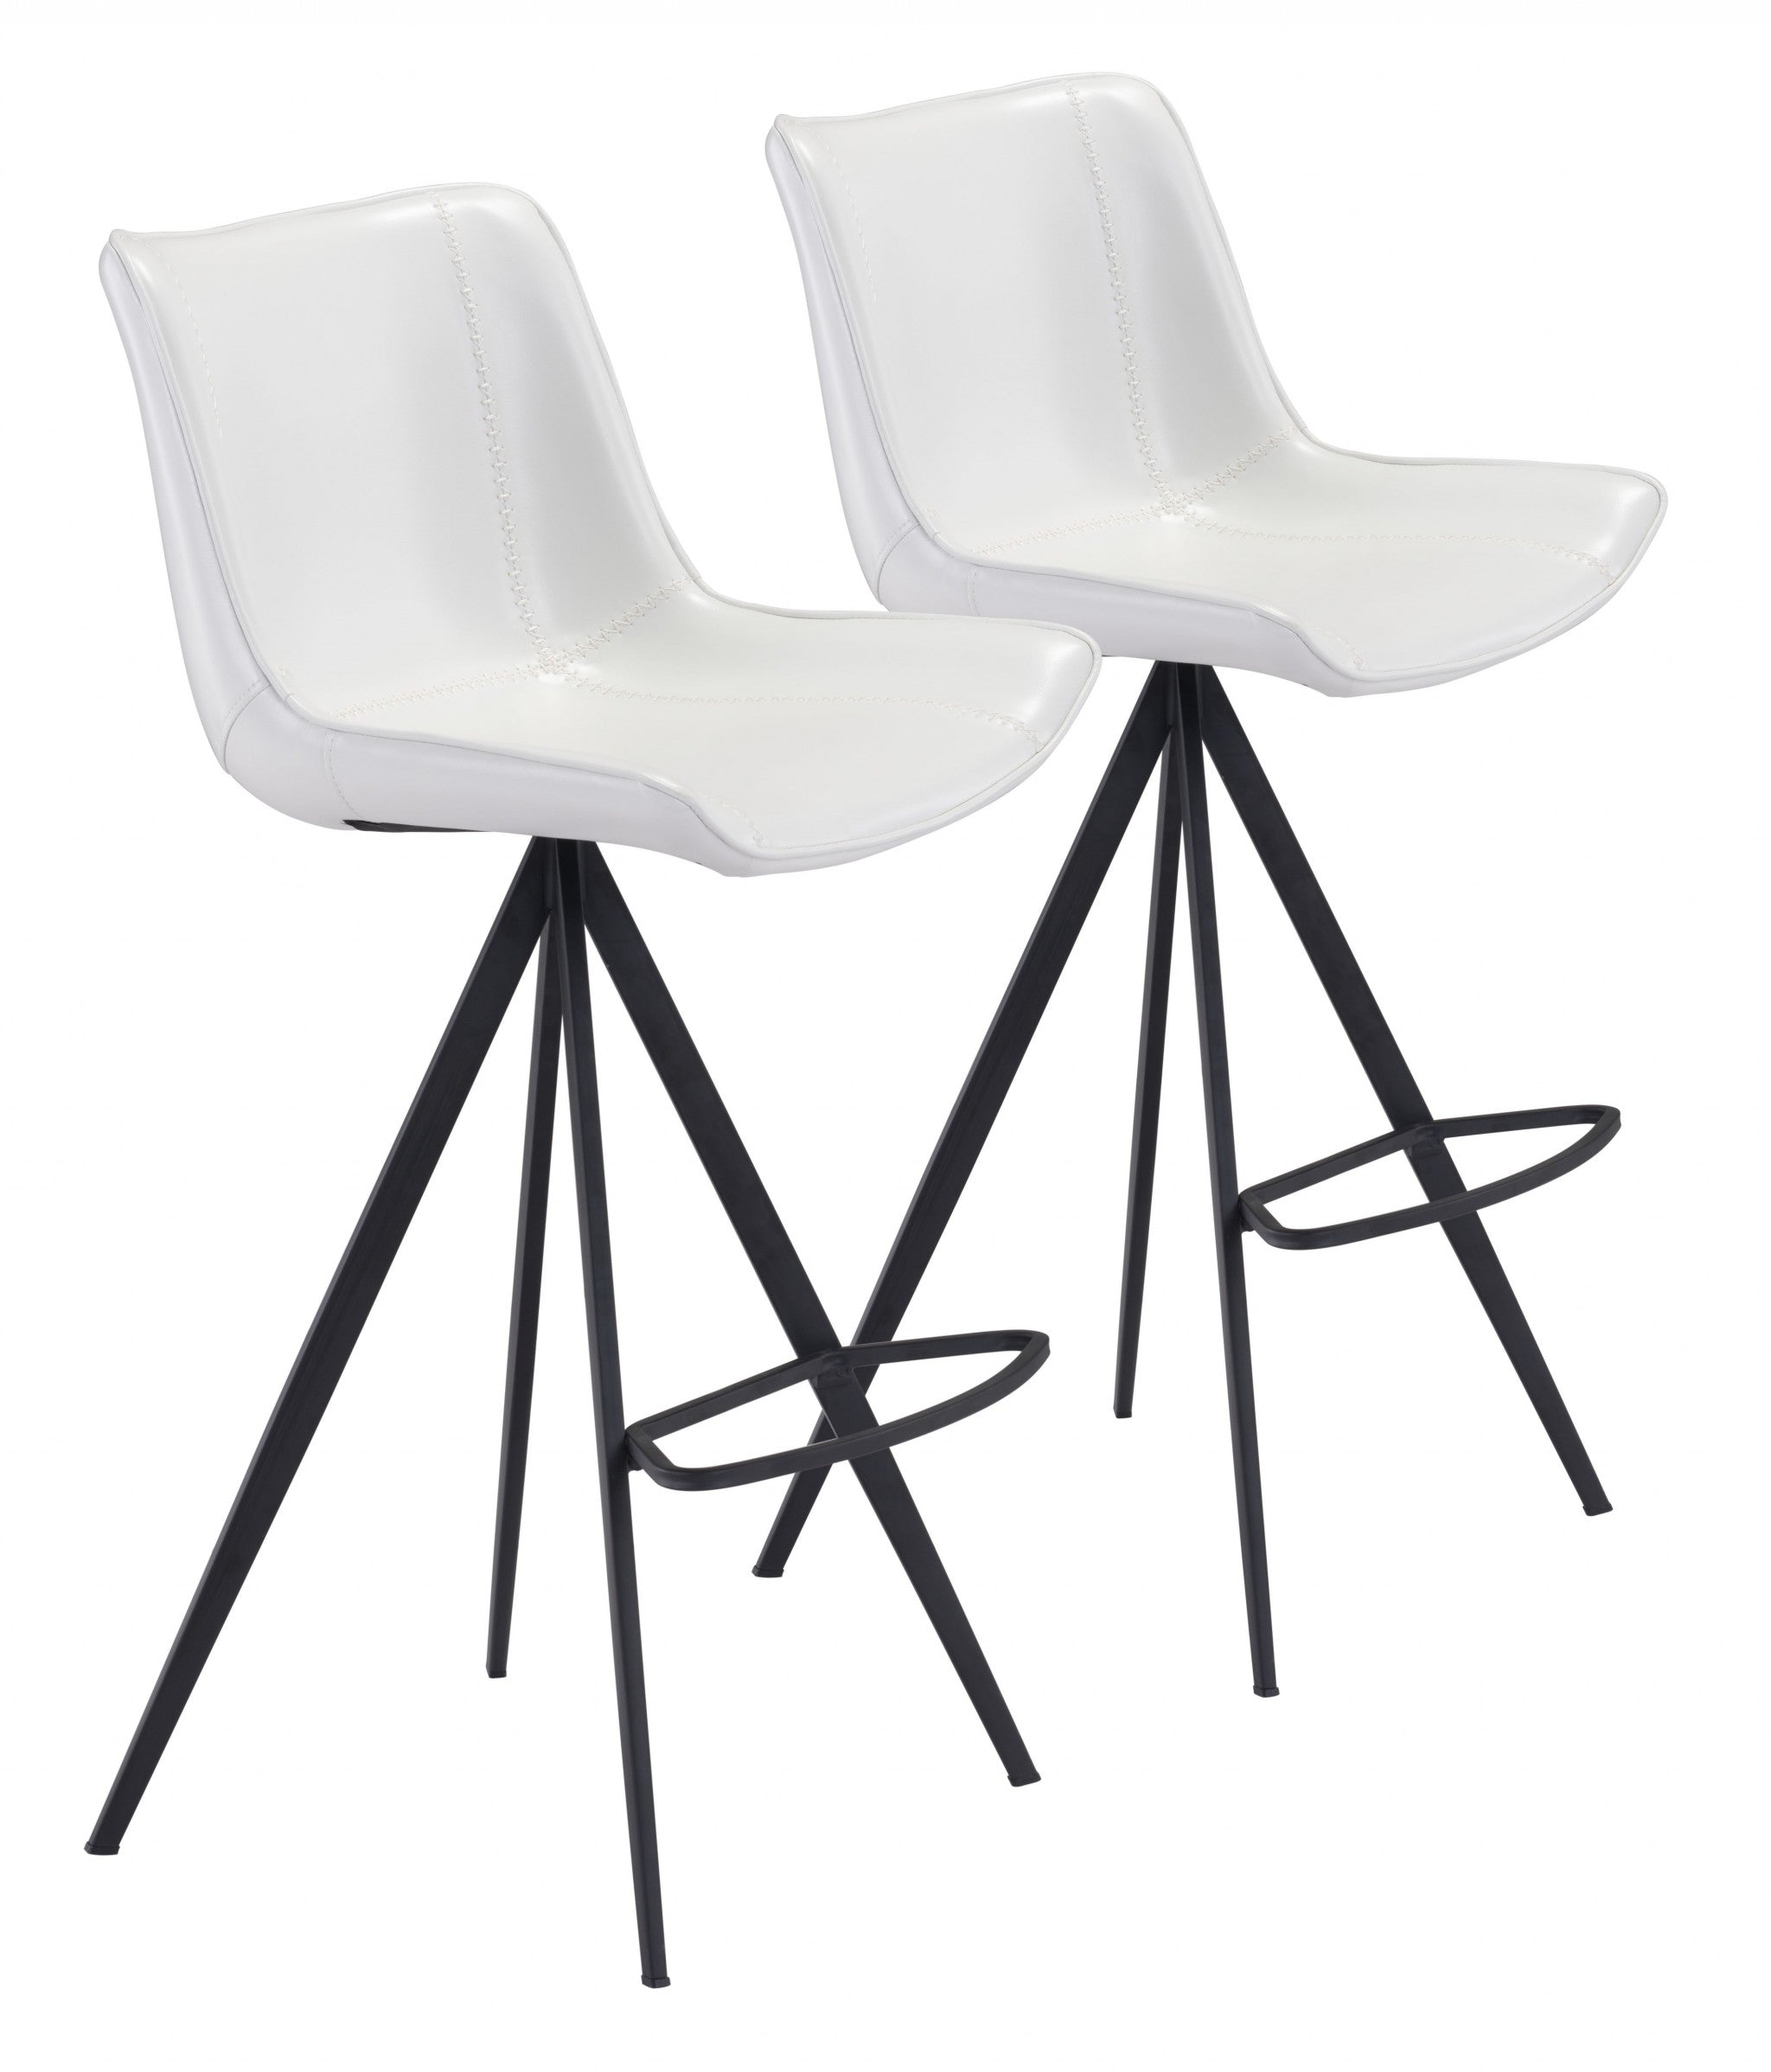 Set of Two 29" White And Black Steel Low Back Bar Height Bar Chairs